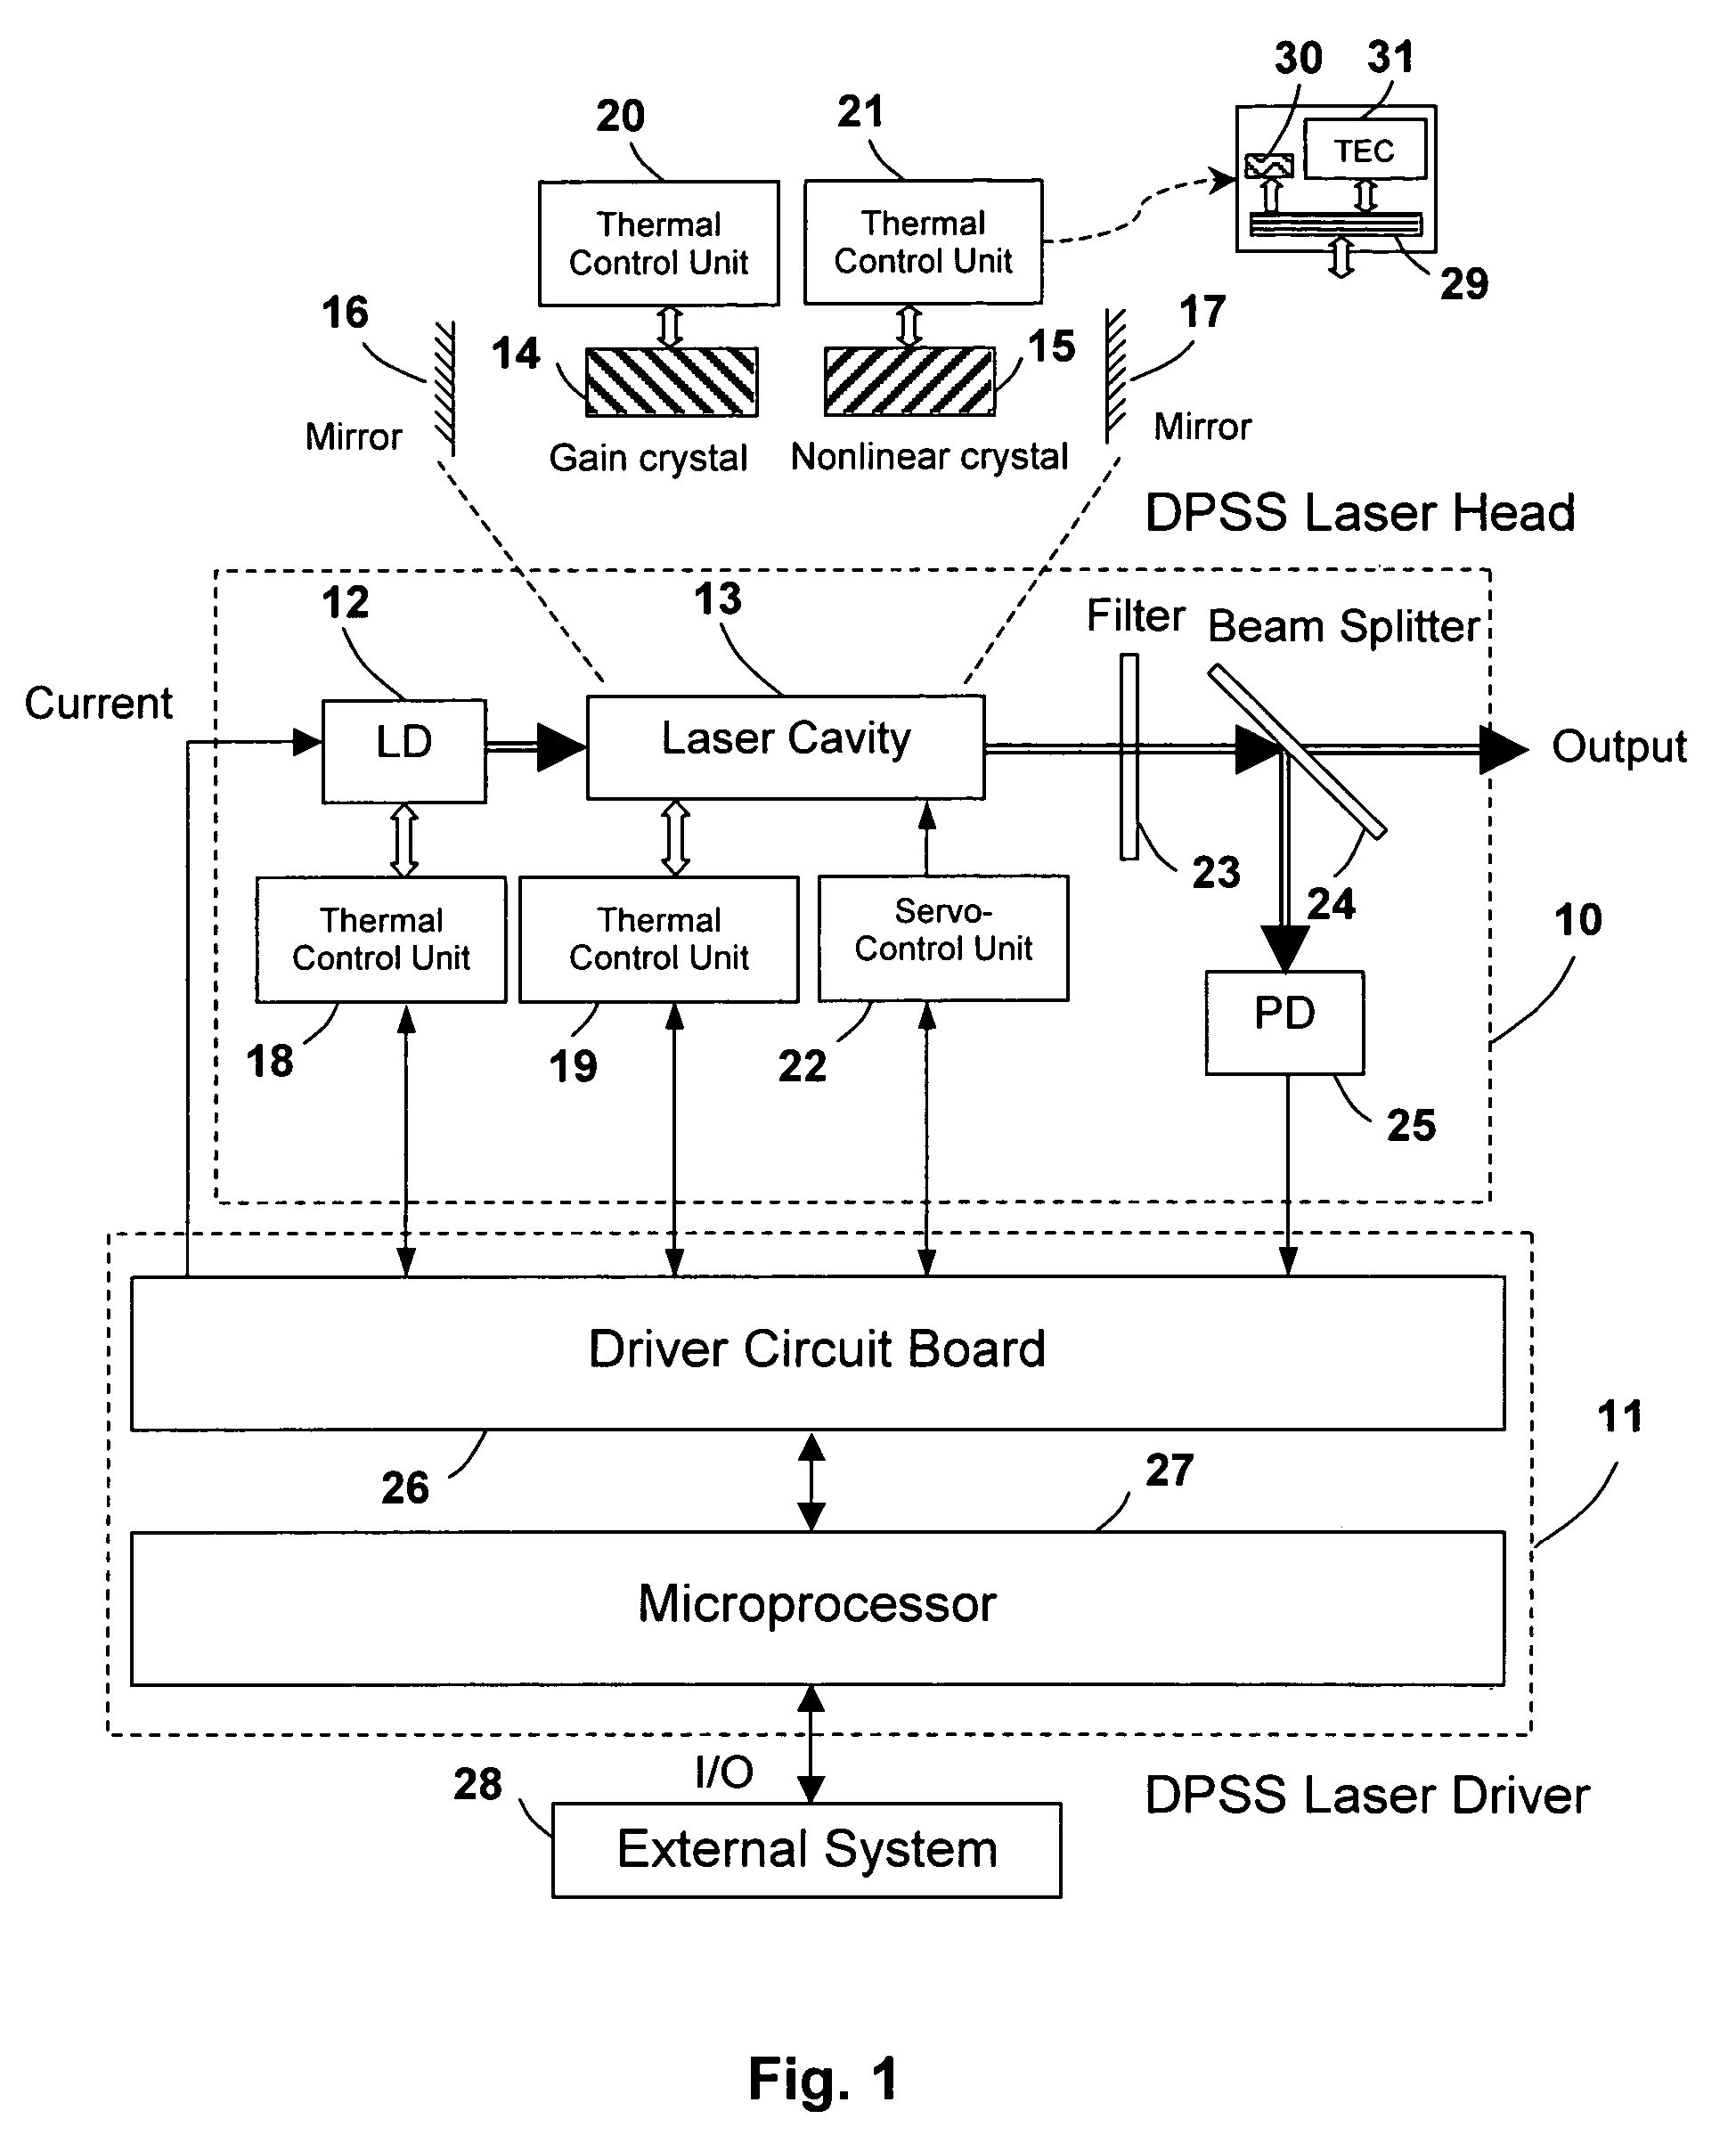 Diode-pumped solid-state laser with self-maintained multi-dimensional optimization